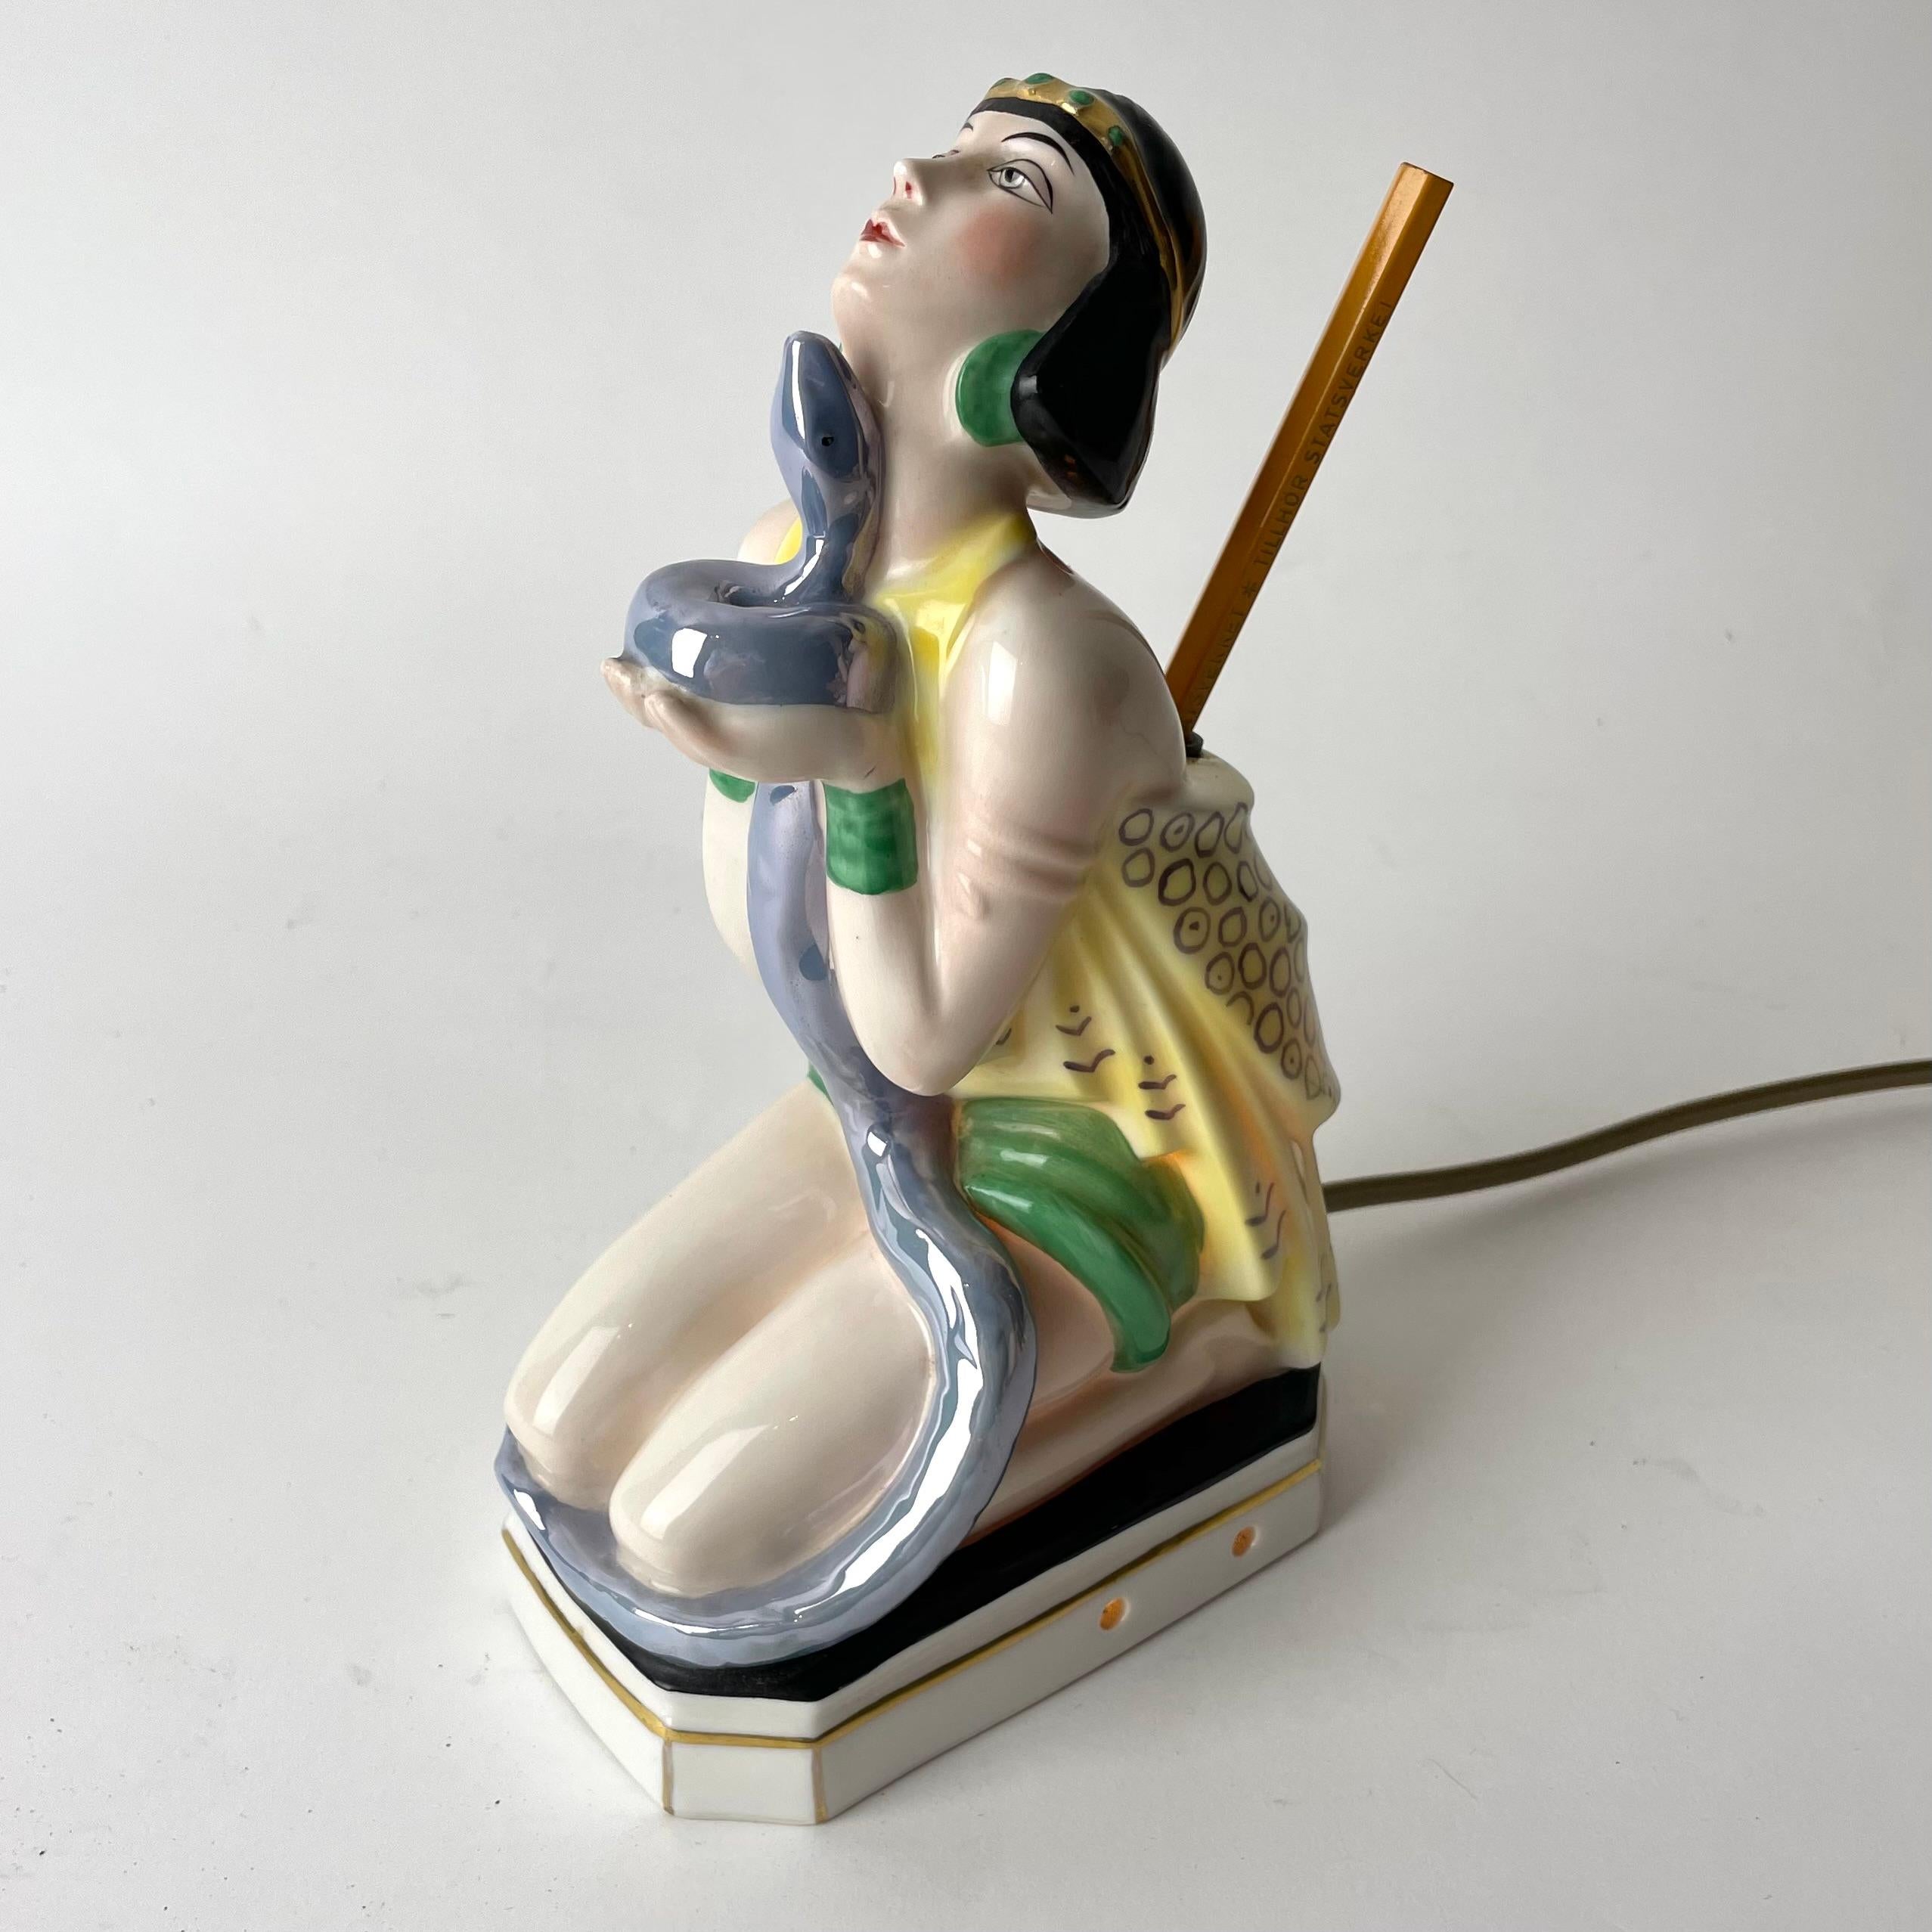 Art Deco Table Lamp with Pen Stand, depicting lady with oriental dress facing upwards while holding a snake. 
A charming table lamp from the 1920s. The woman kneels upon a black and white ceramic base with golden details. A blue snake stretches from